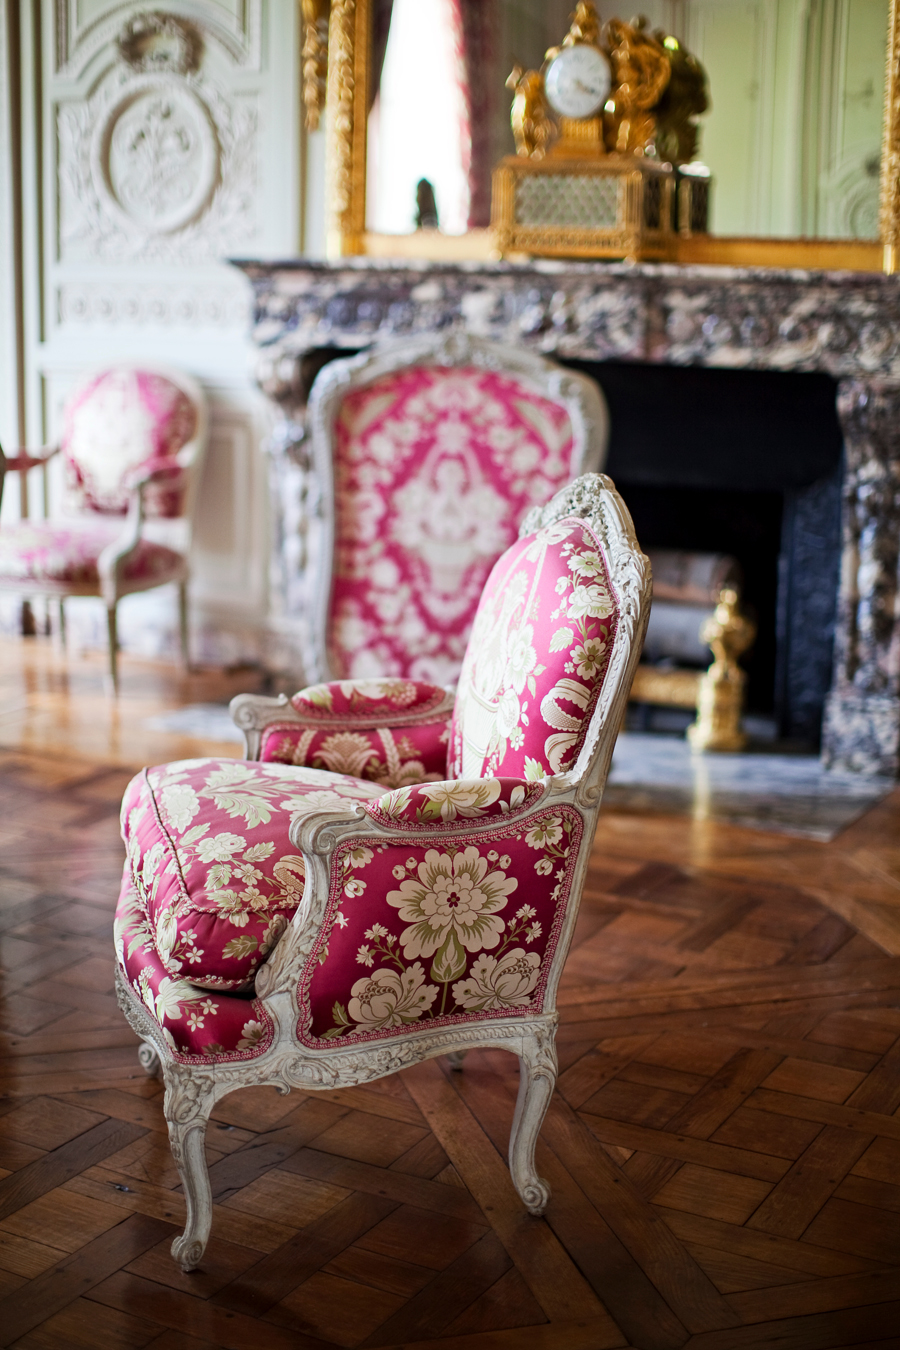 Upholstery at Versailles